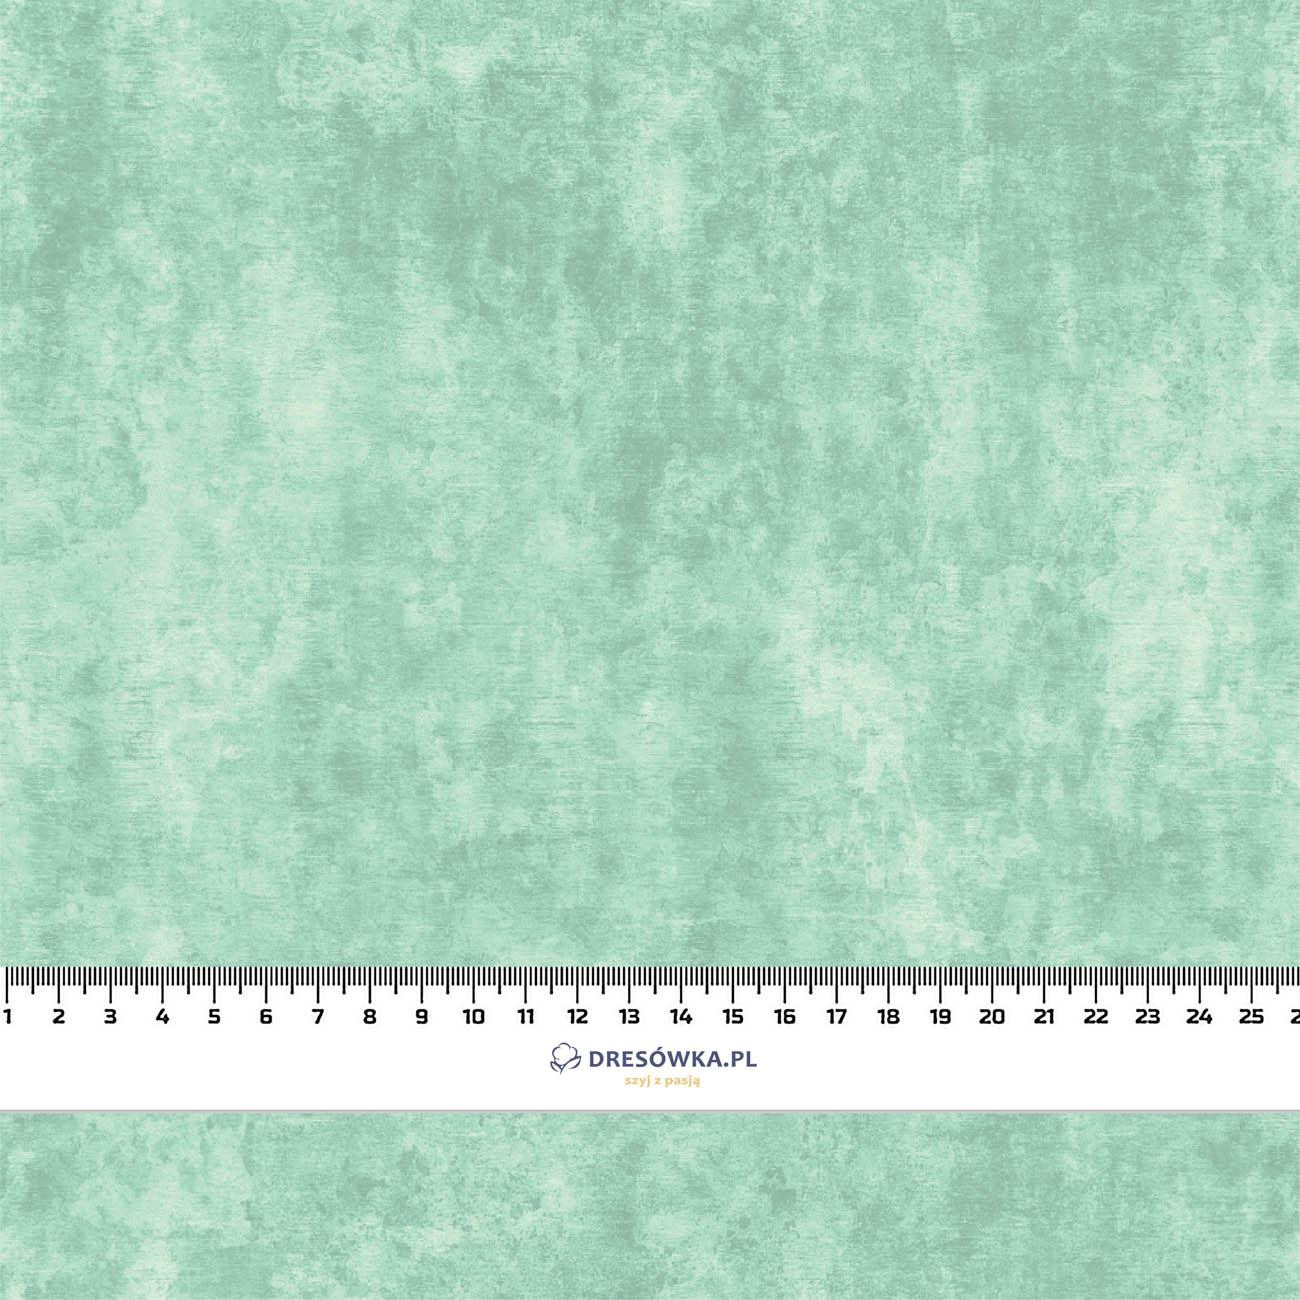 GRUNGE (mint) - looped knit fabric